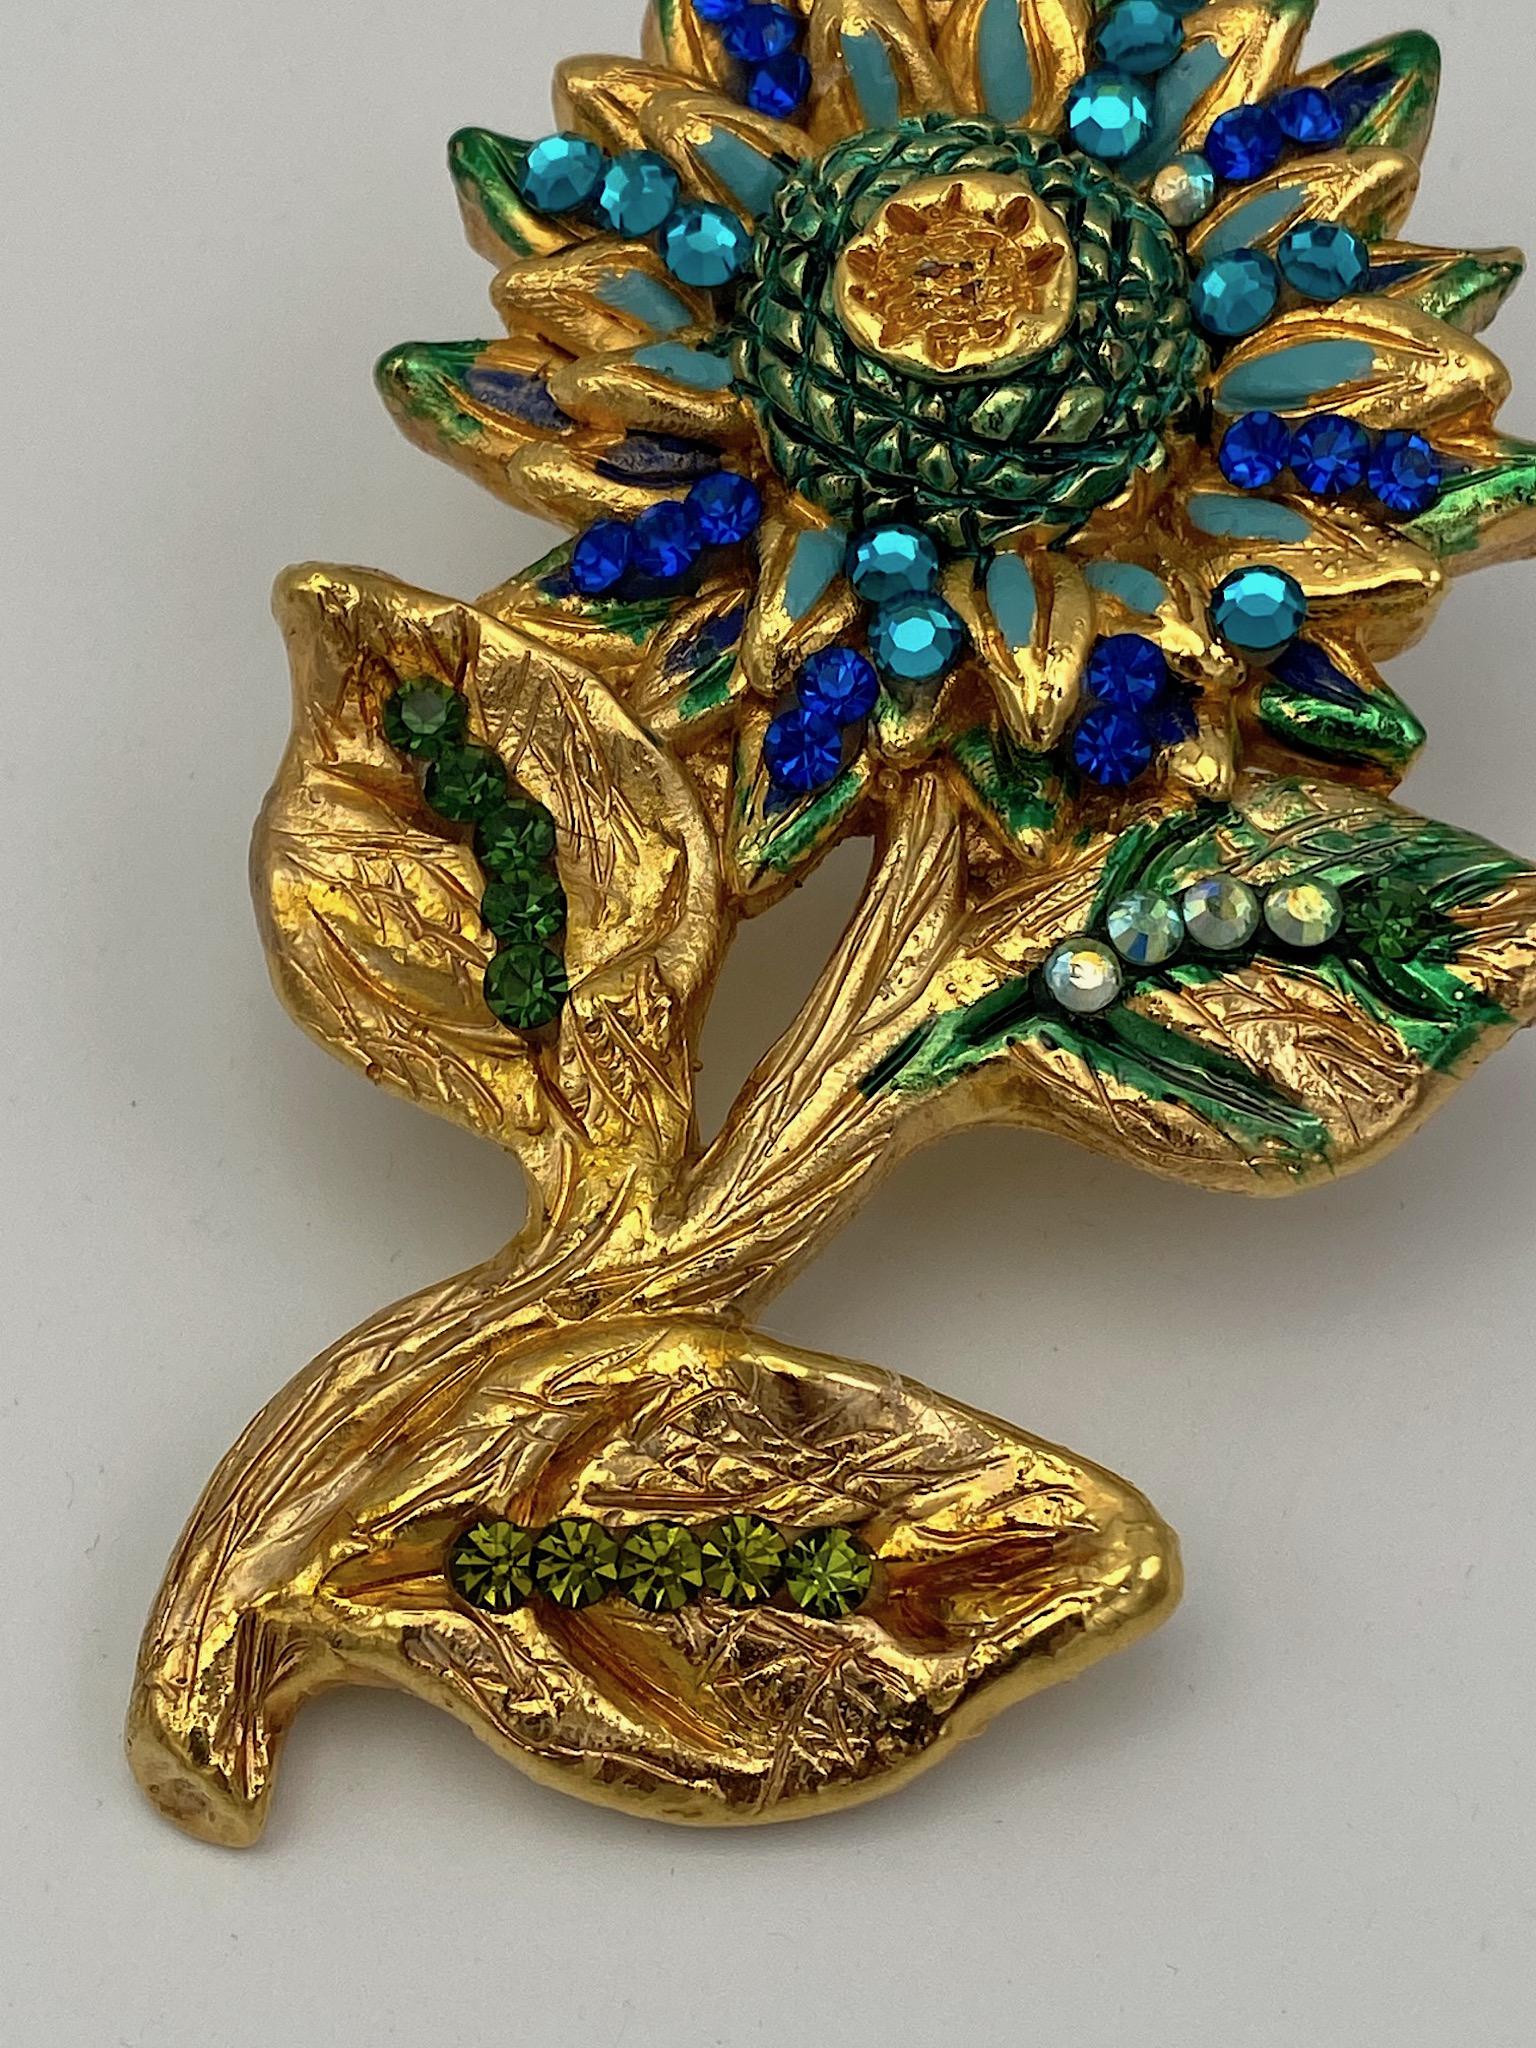 Produced predominantly in Paris in the 1980s and for a very short time, Jacky de G jewelry is highly collectable. It is original, bold in its design and often large in order to compliment the fashions of the day. This sculptural flower brooch is